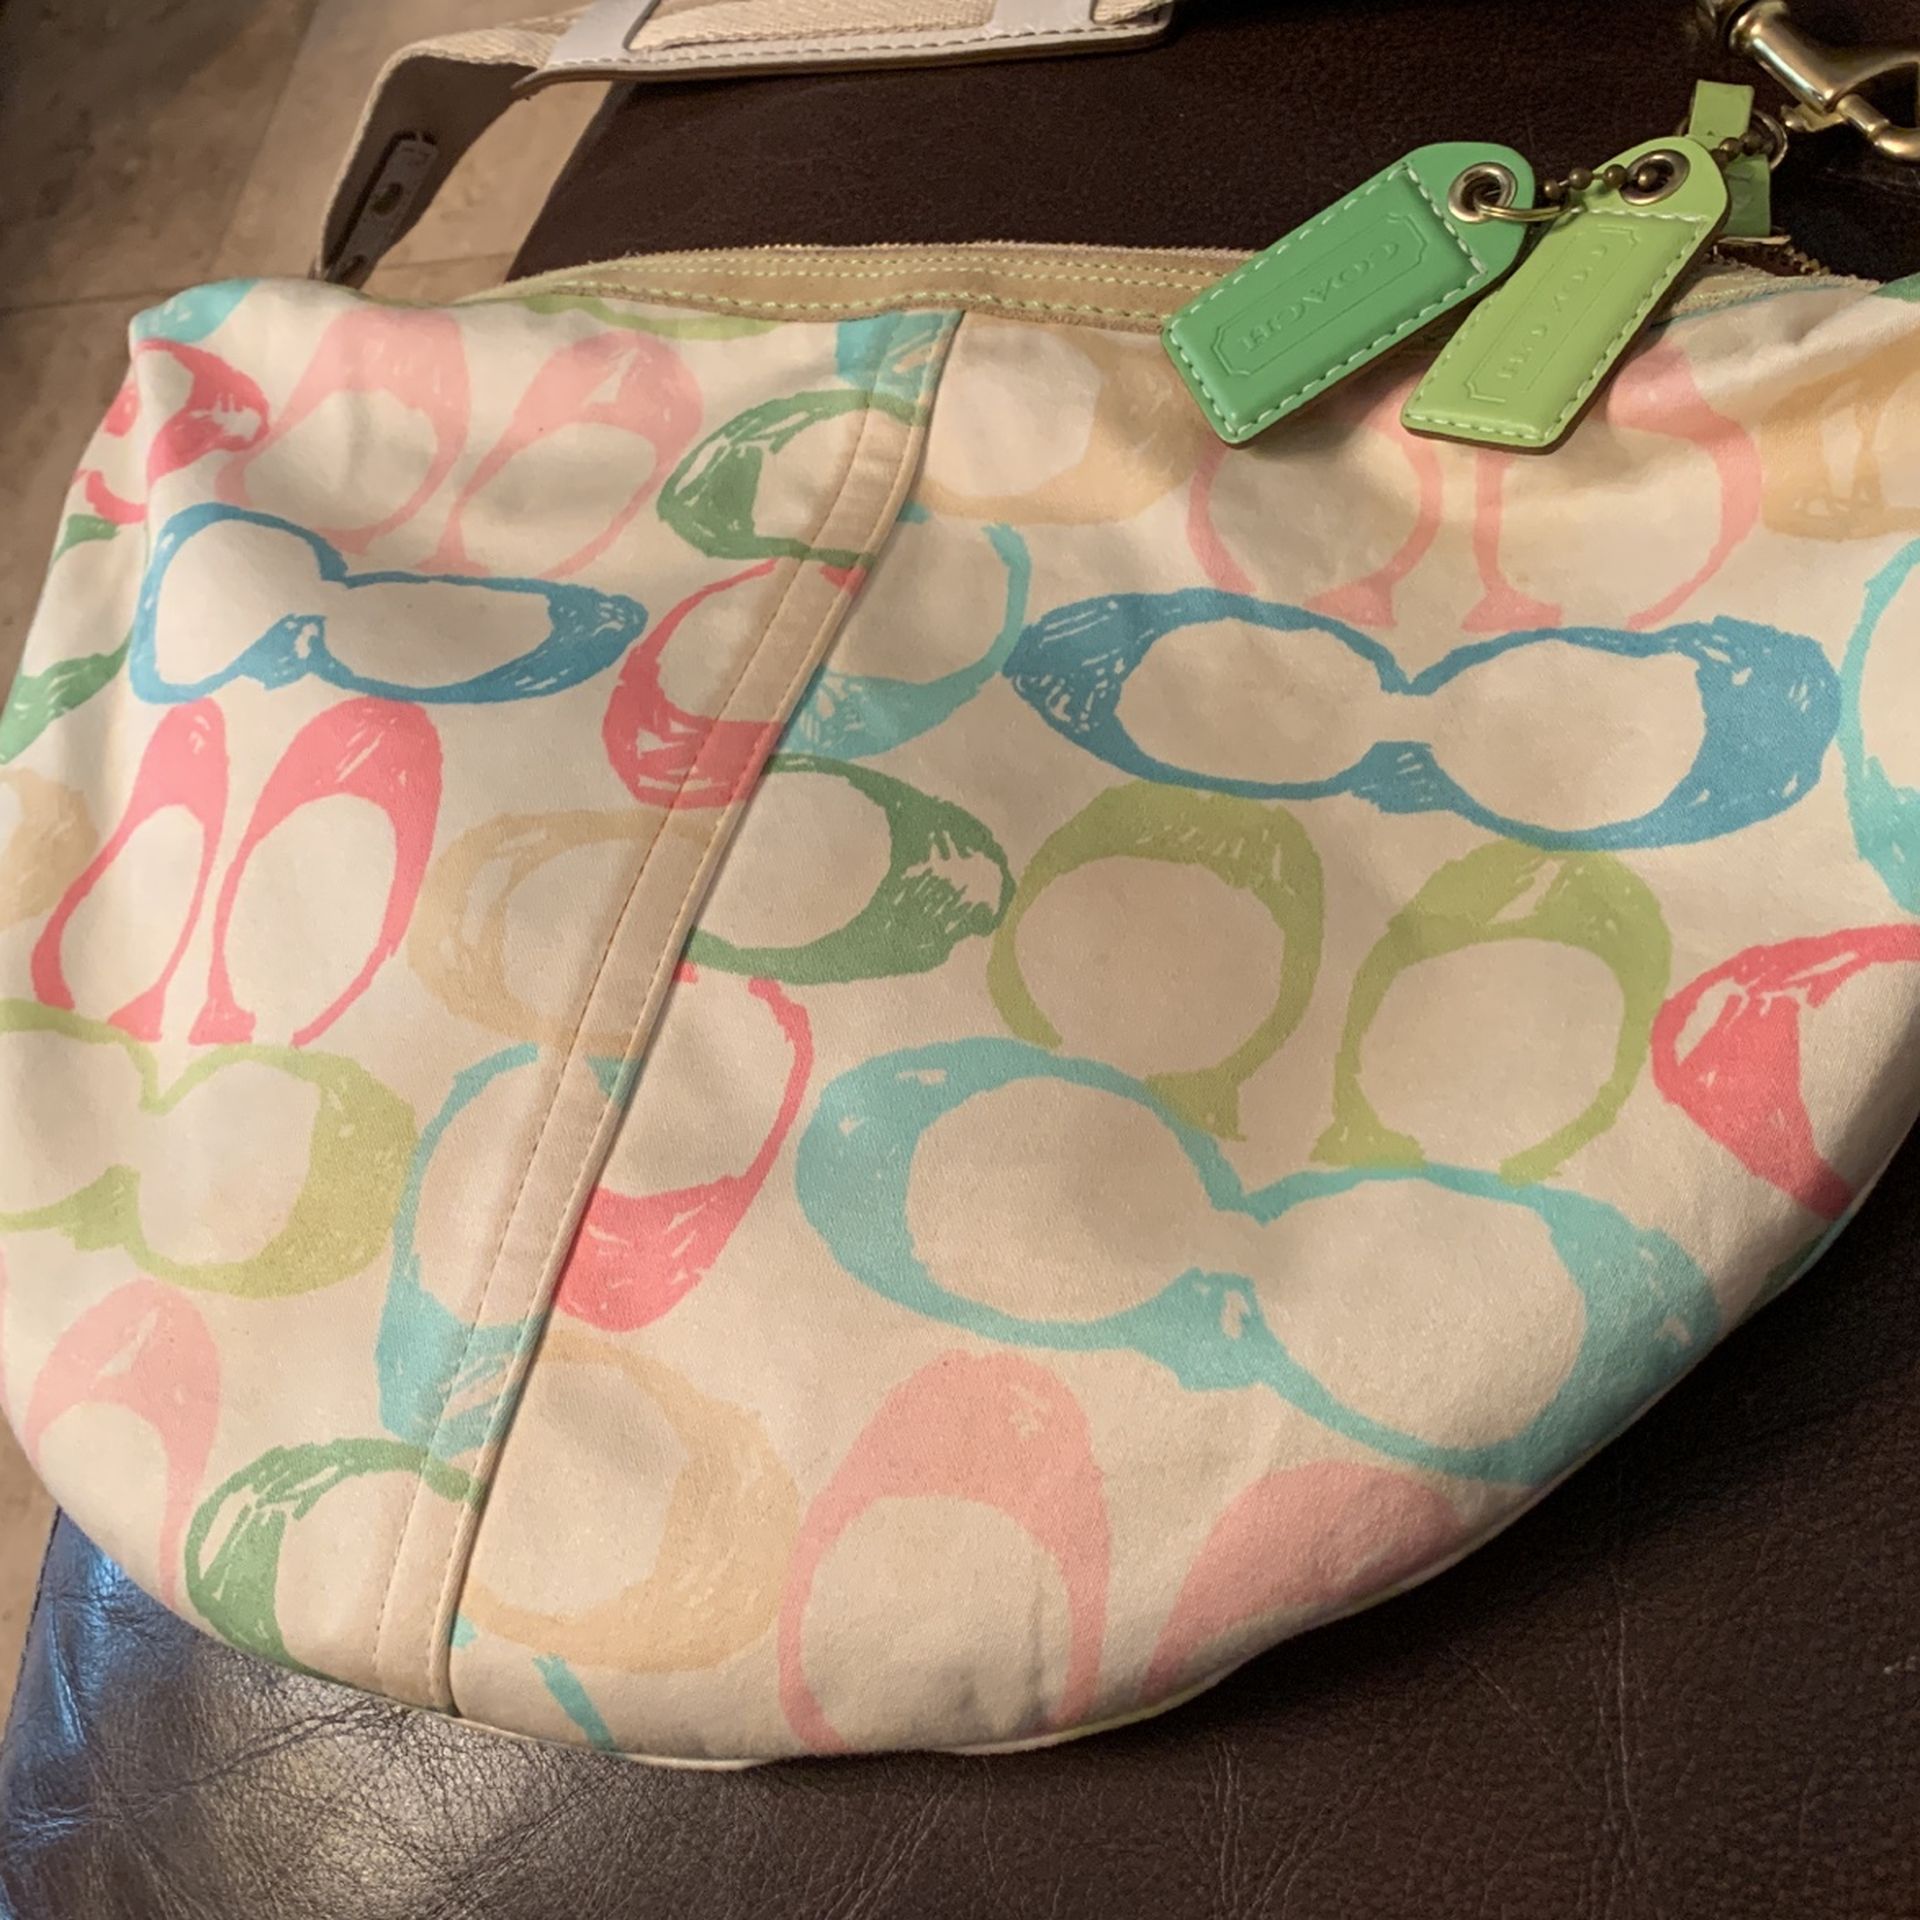 Coach Colorful White Coated Canvas Shoulder Bag-sells For $70-$200 Used- Hobo Bag -